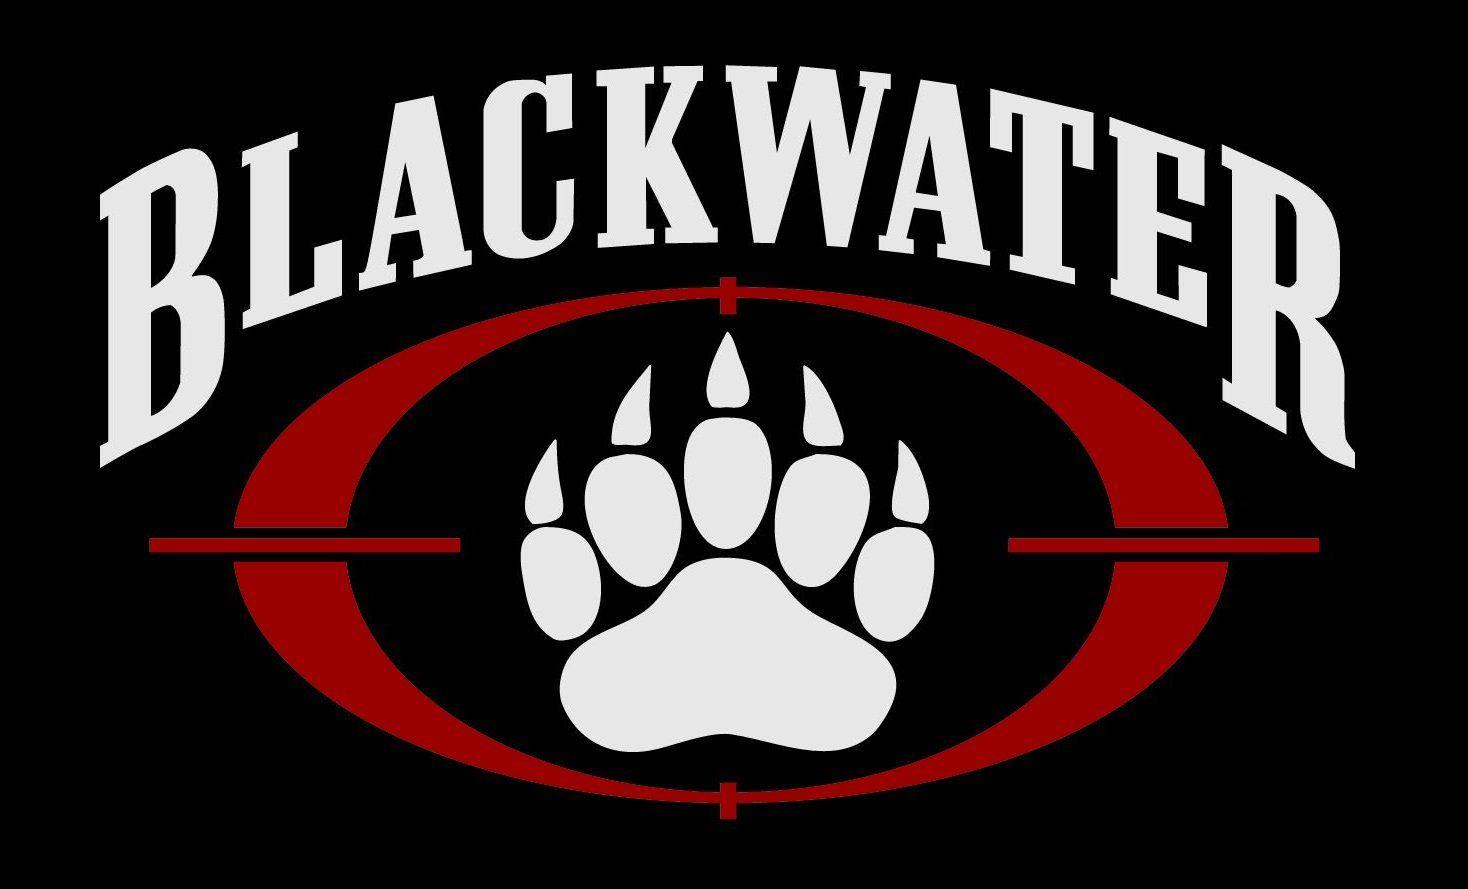 Blackwater Logo - From Murder Conviction to Mistrial in Case of Blackwater Guard's ...